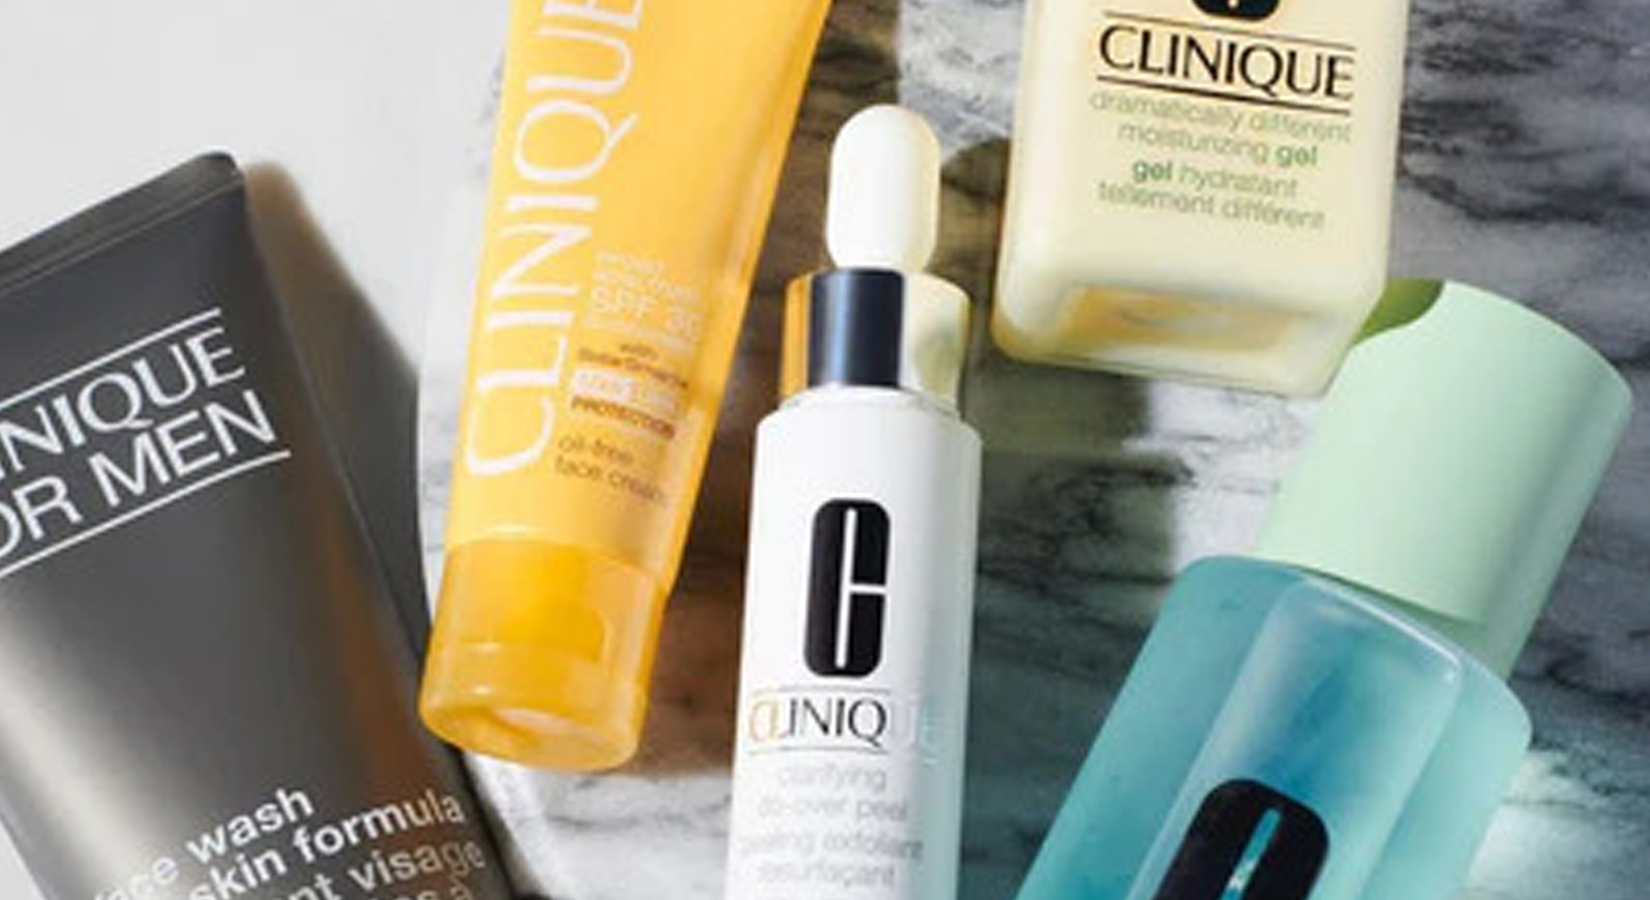 Why Clinique's Skincare Line is a Must-Have in Your Beauty Routine